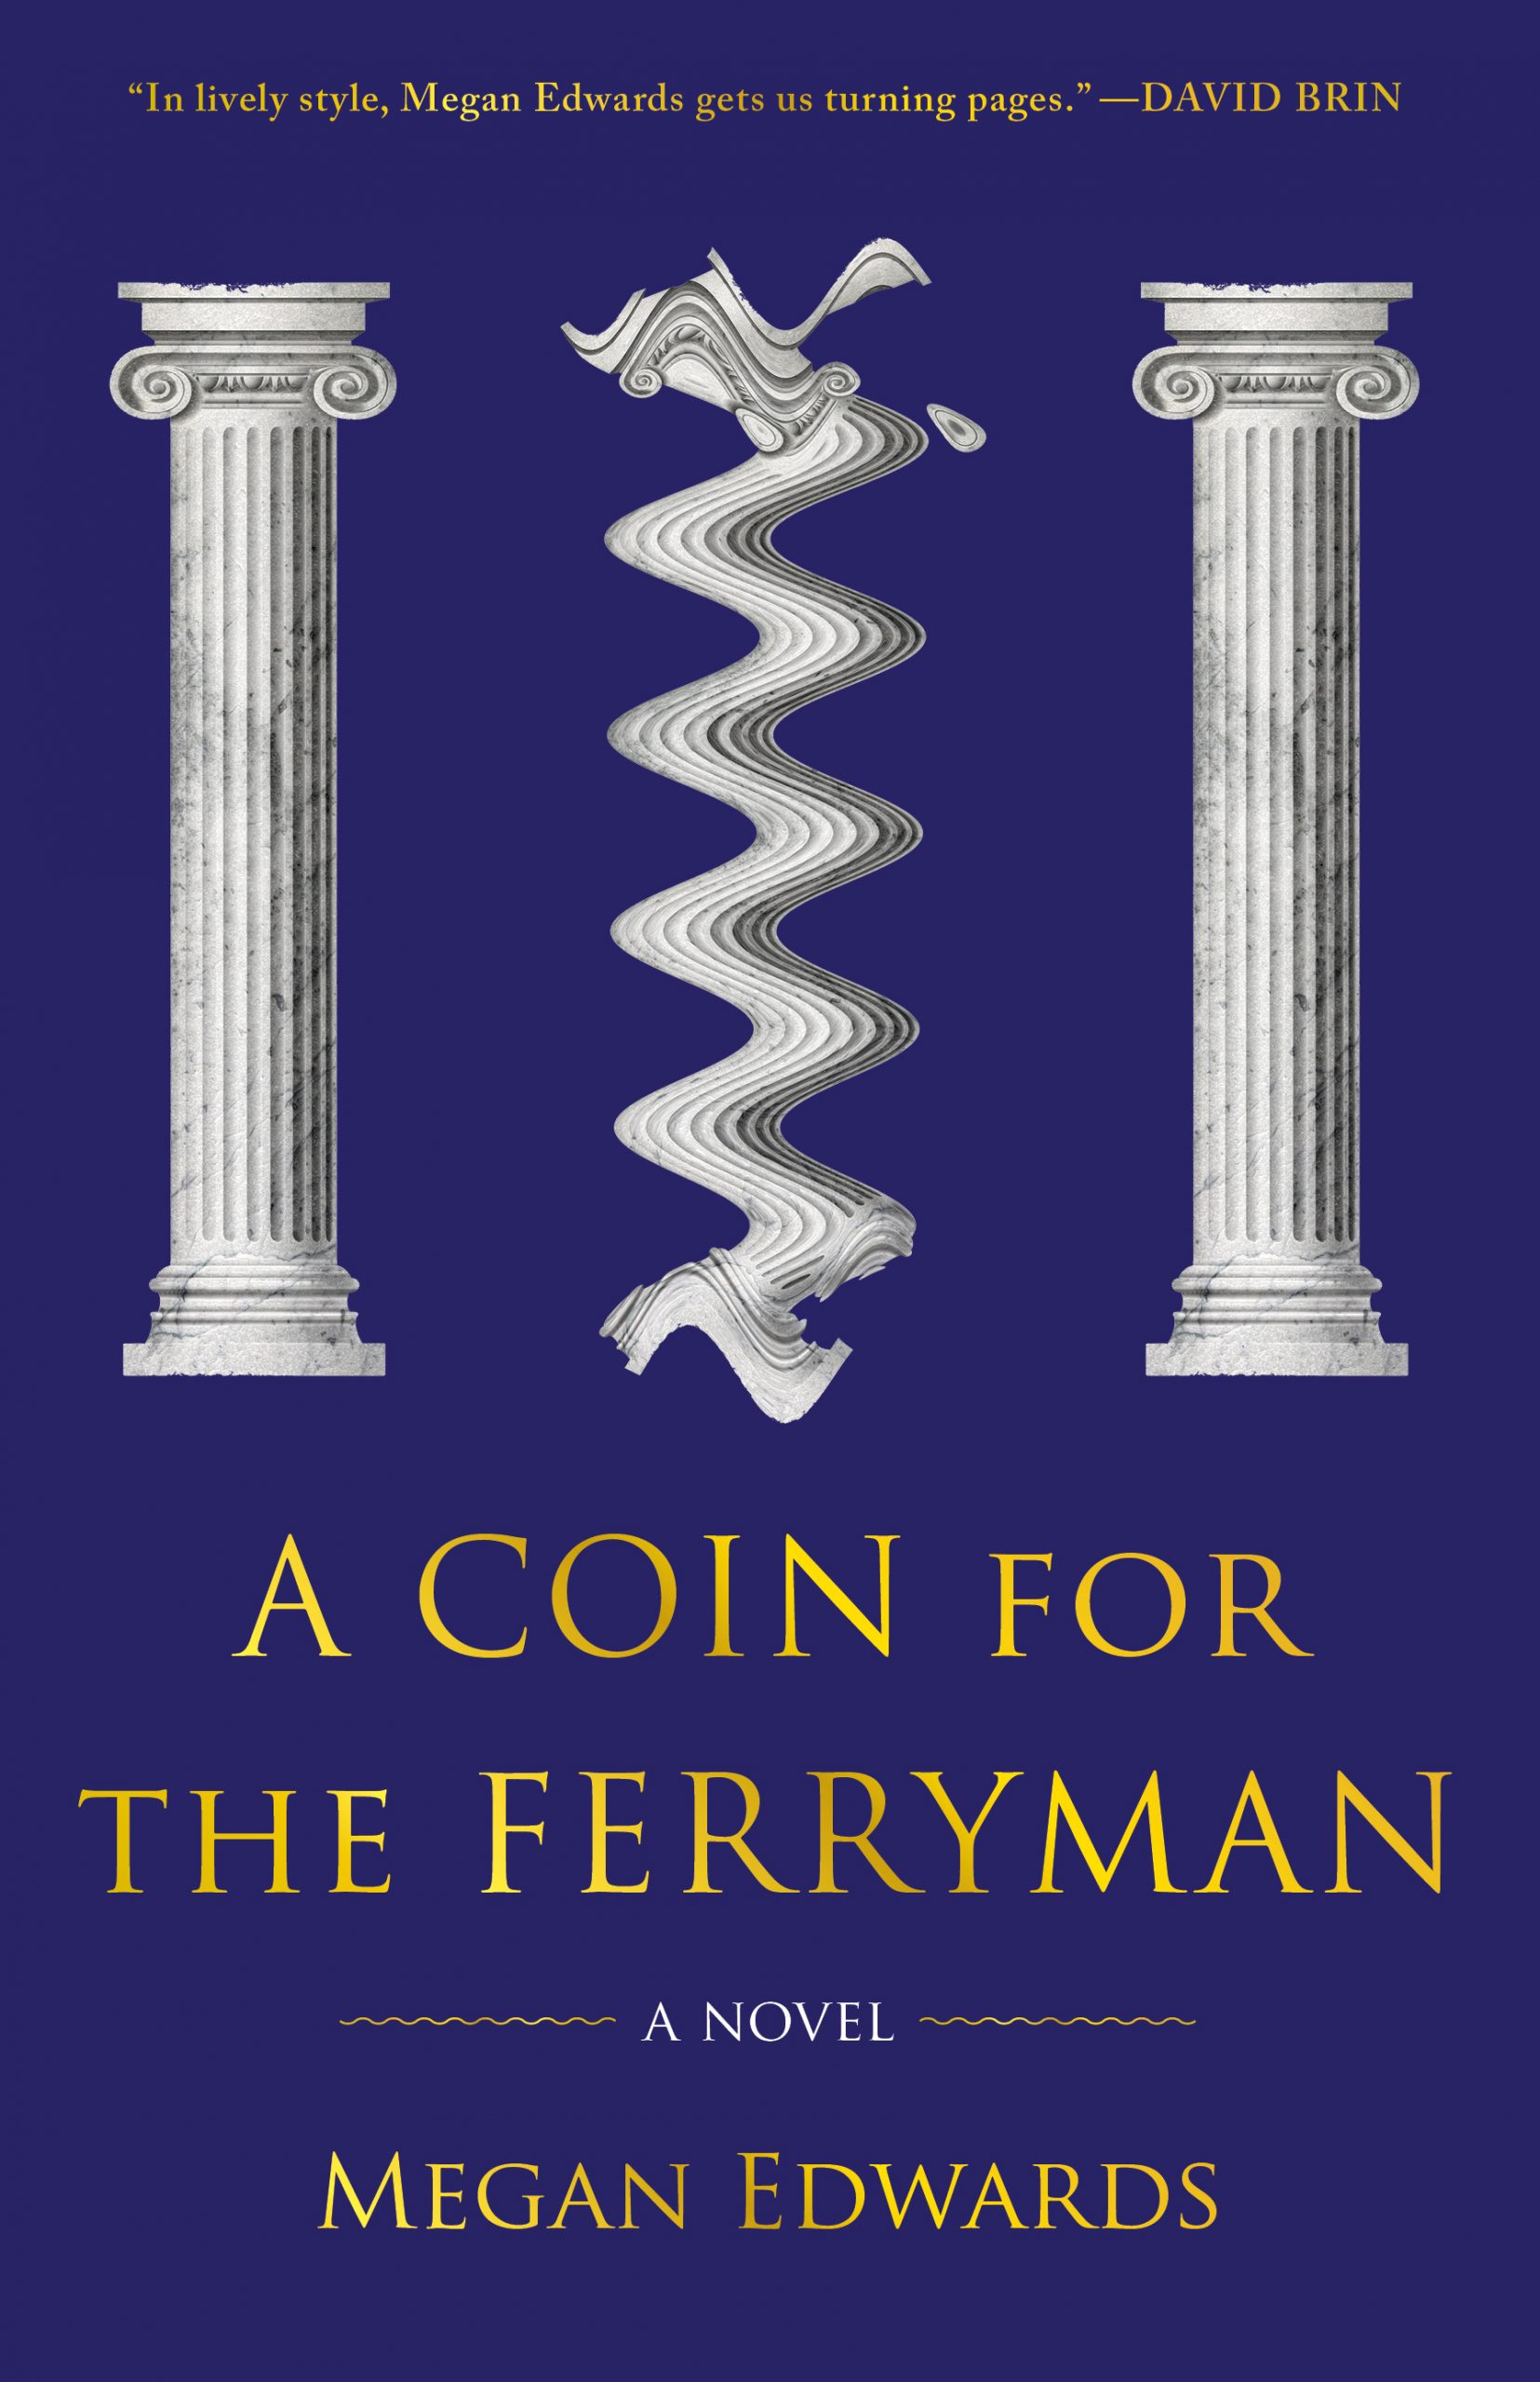 A COIN FOR THE FERRYMAN by Megan Edwards